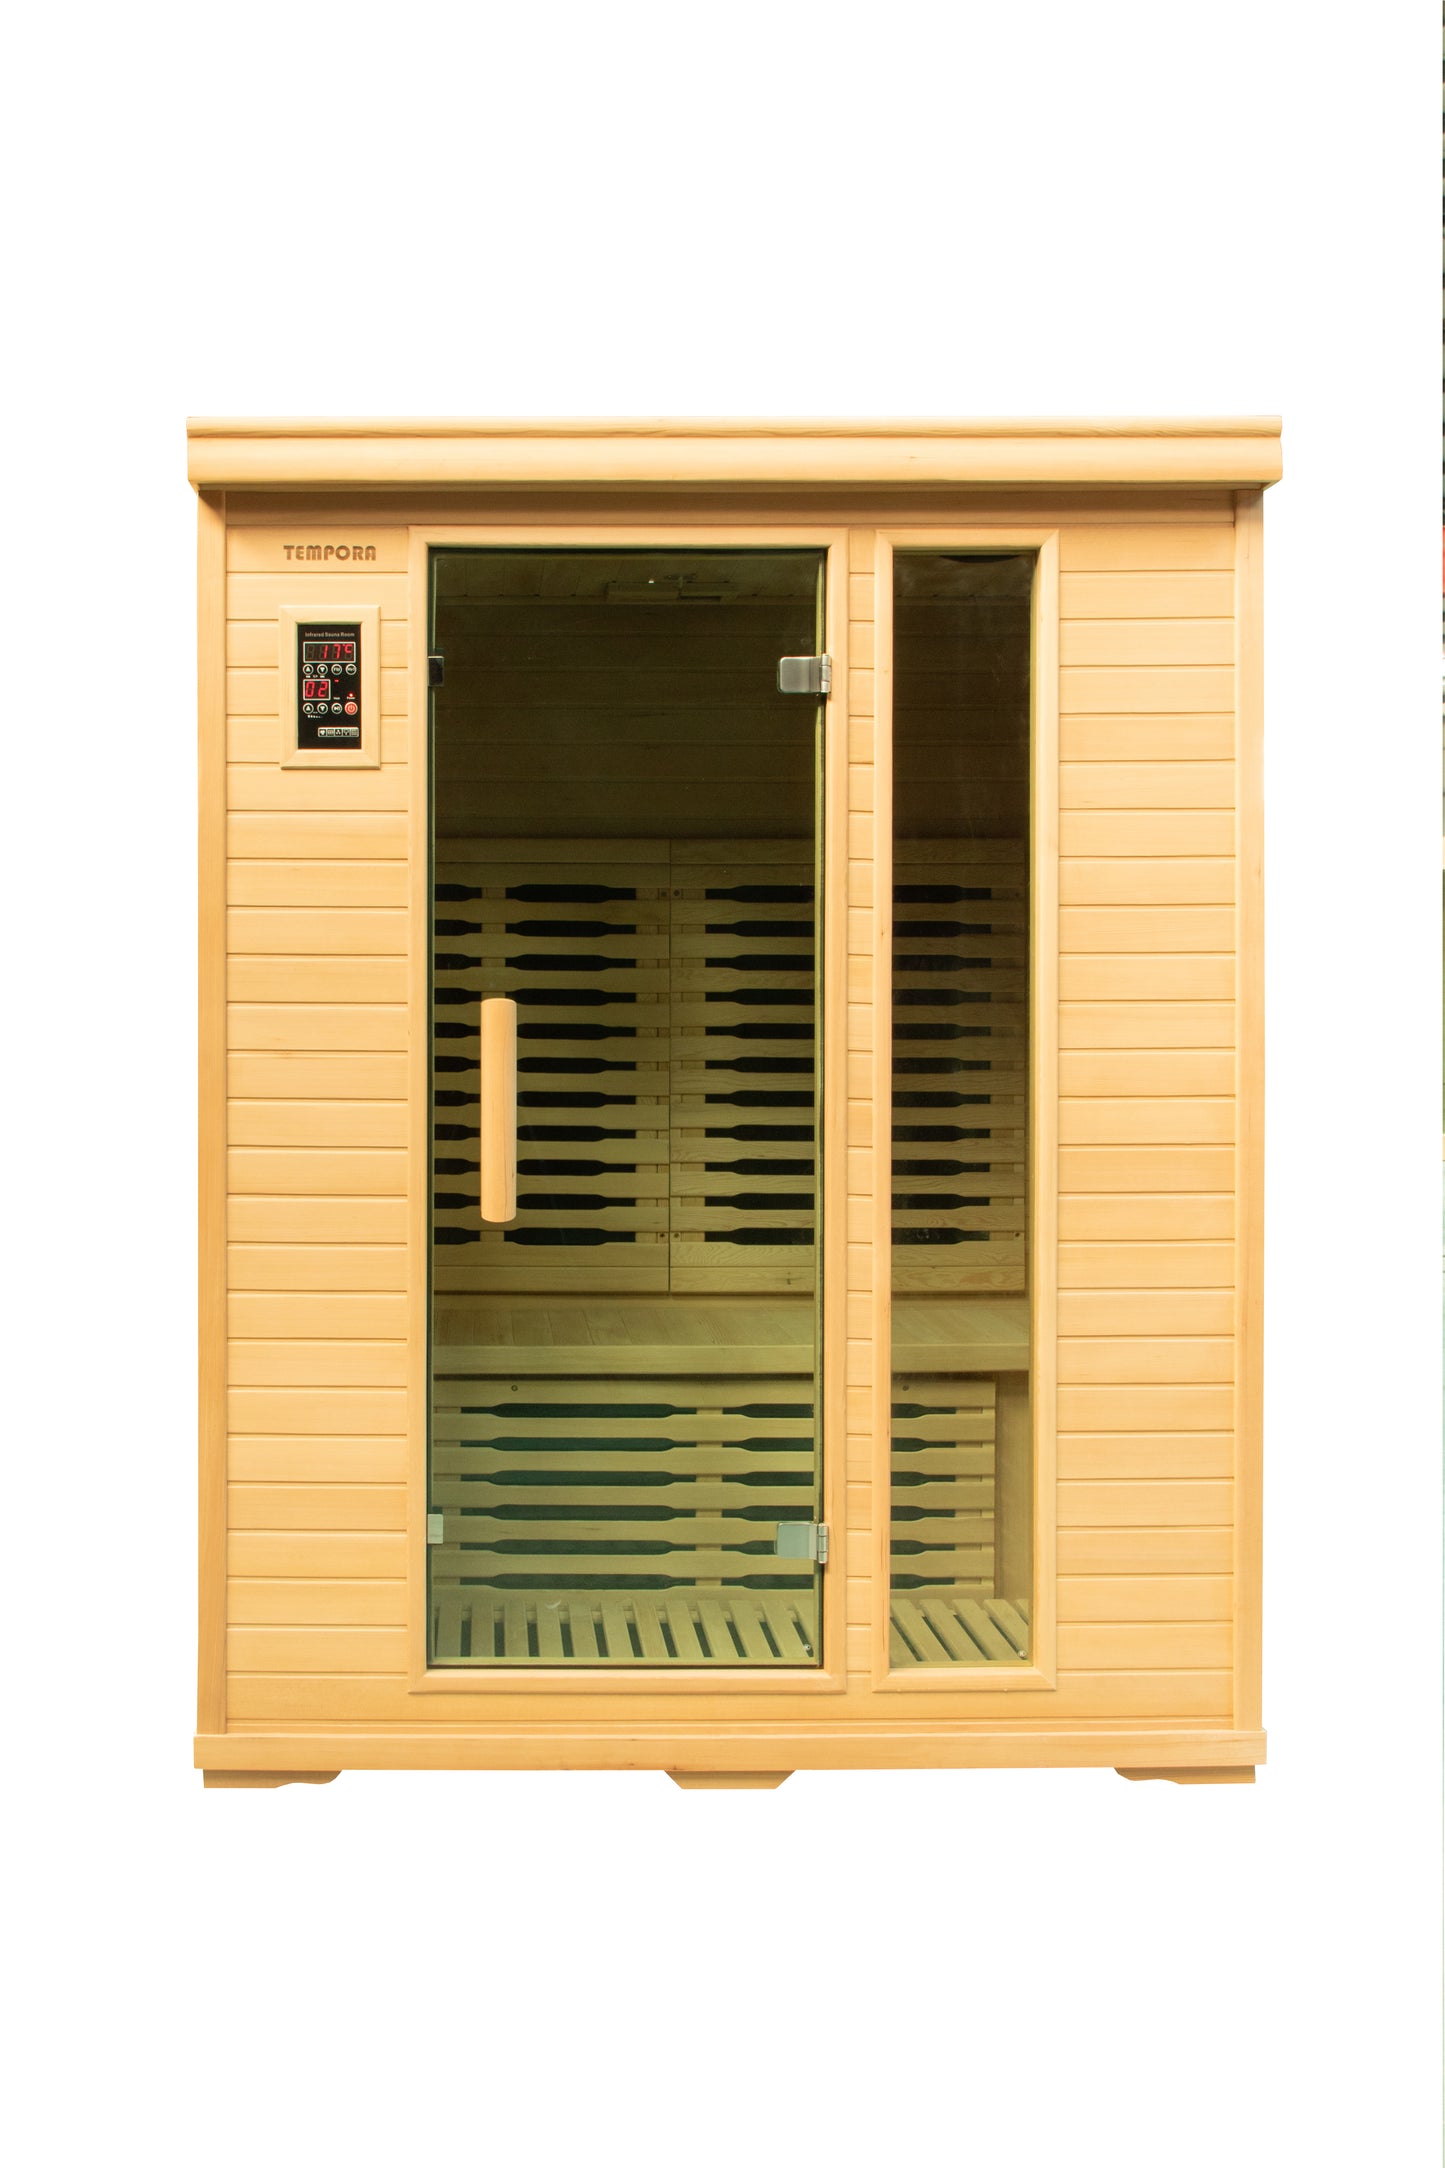 3 Person Luxury Carbon Fibre Infrared Sauna 8 Heating Panels 003B